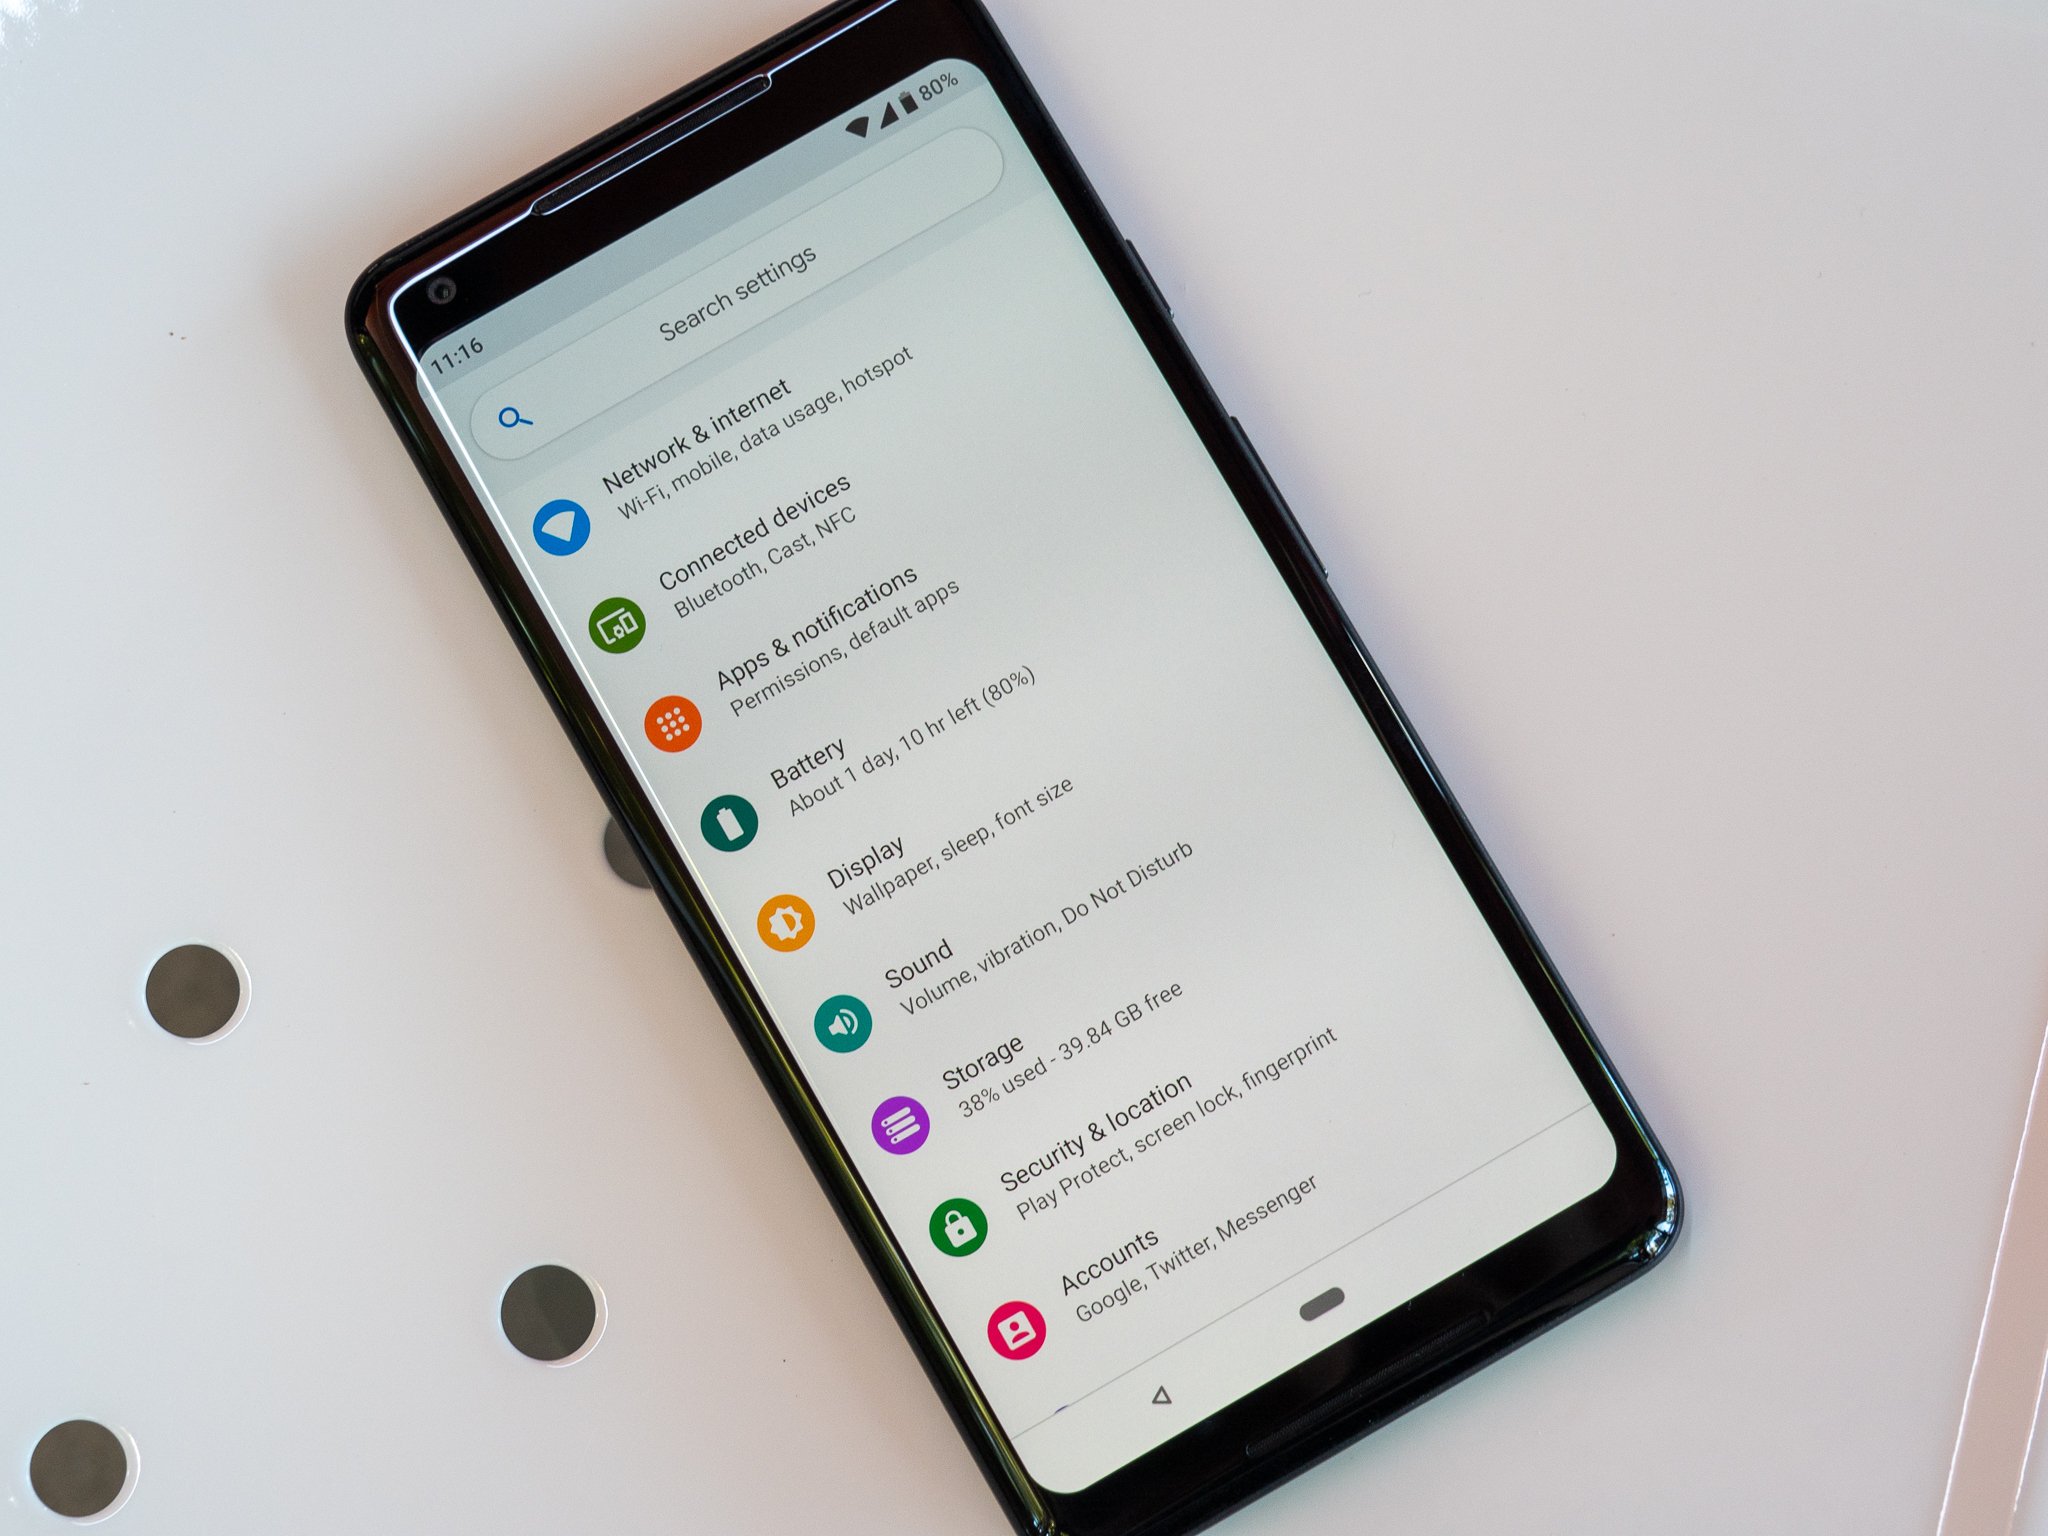 Android Pie's settings page